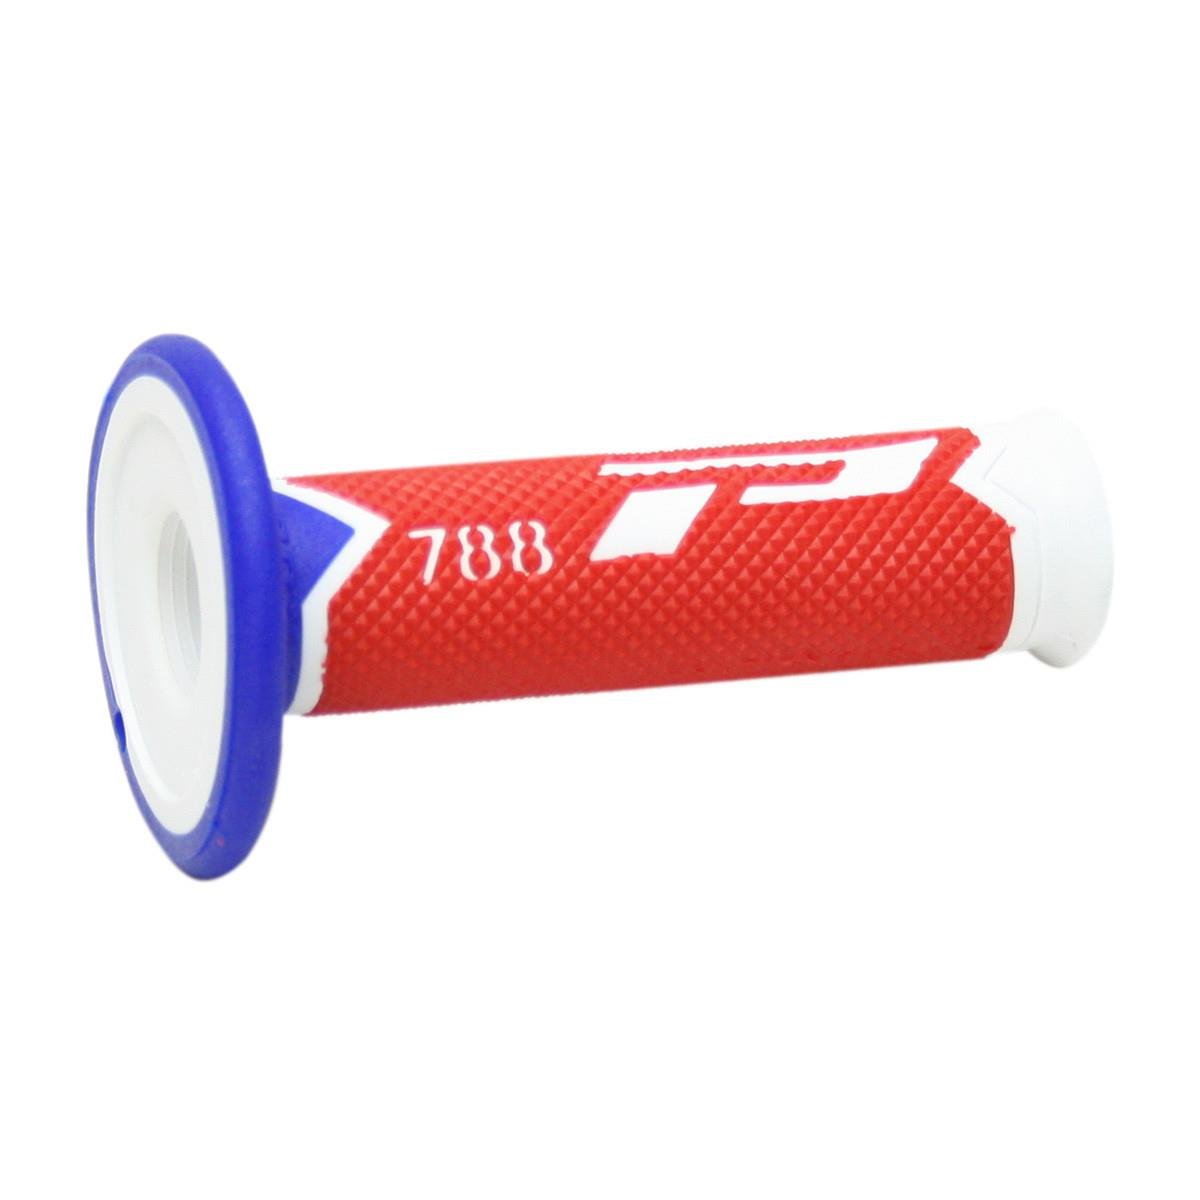 ProGrip Grips 788 White/Red/Blue